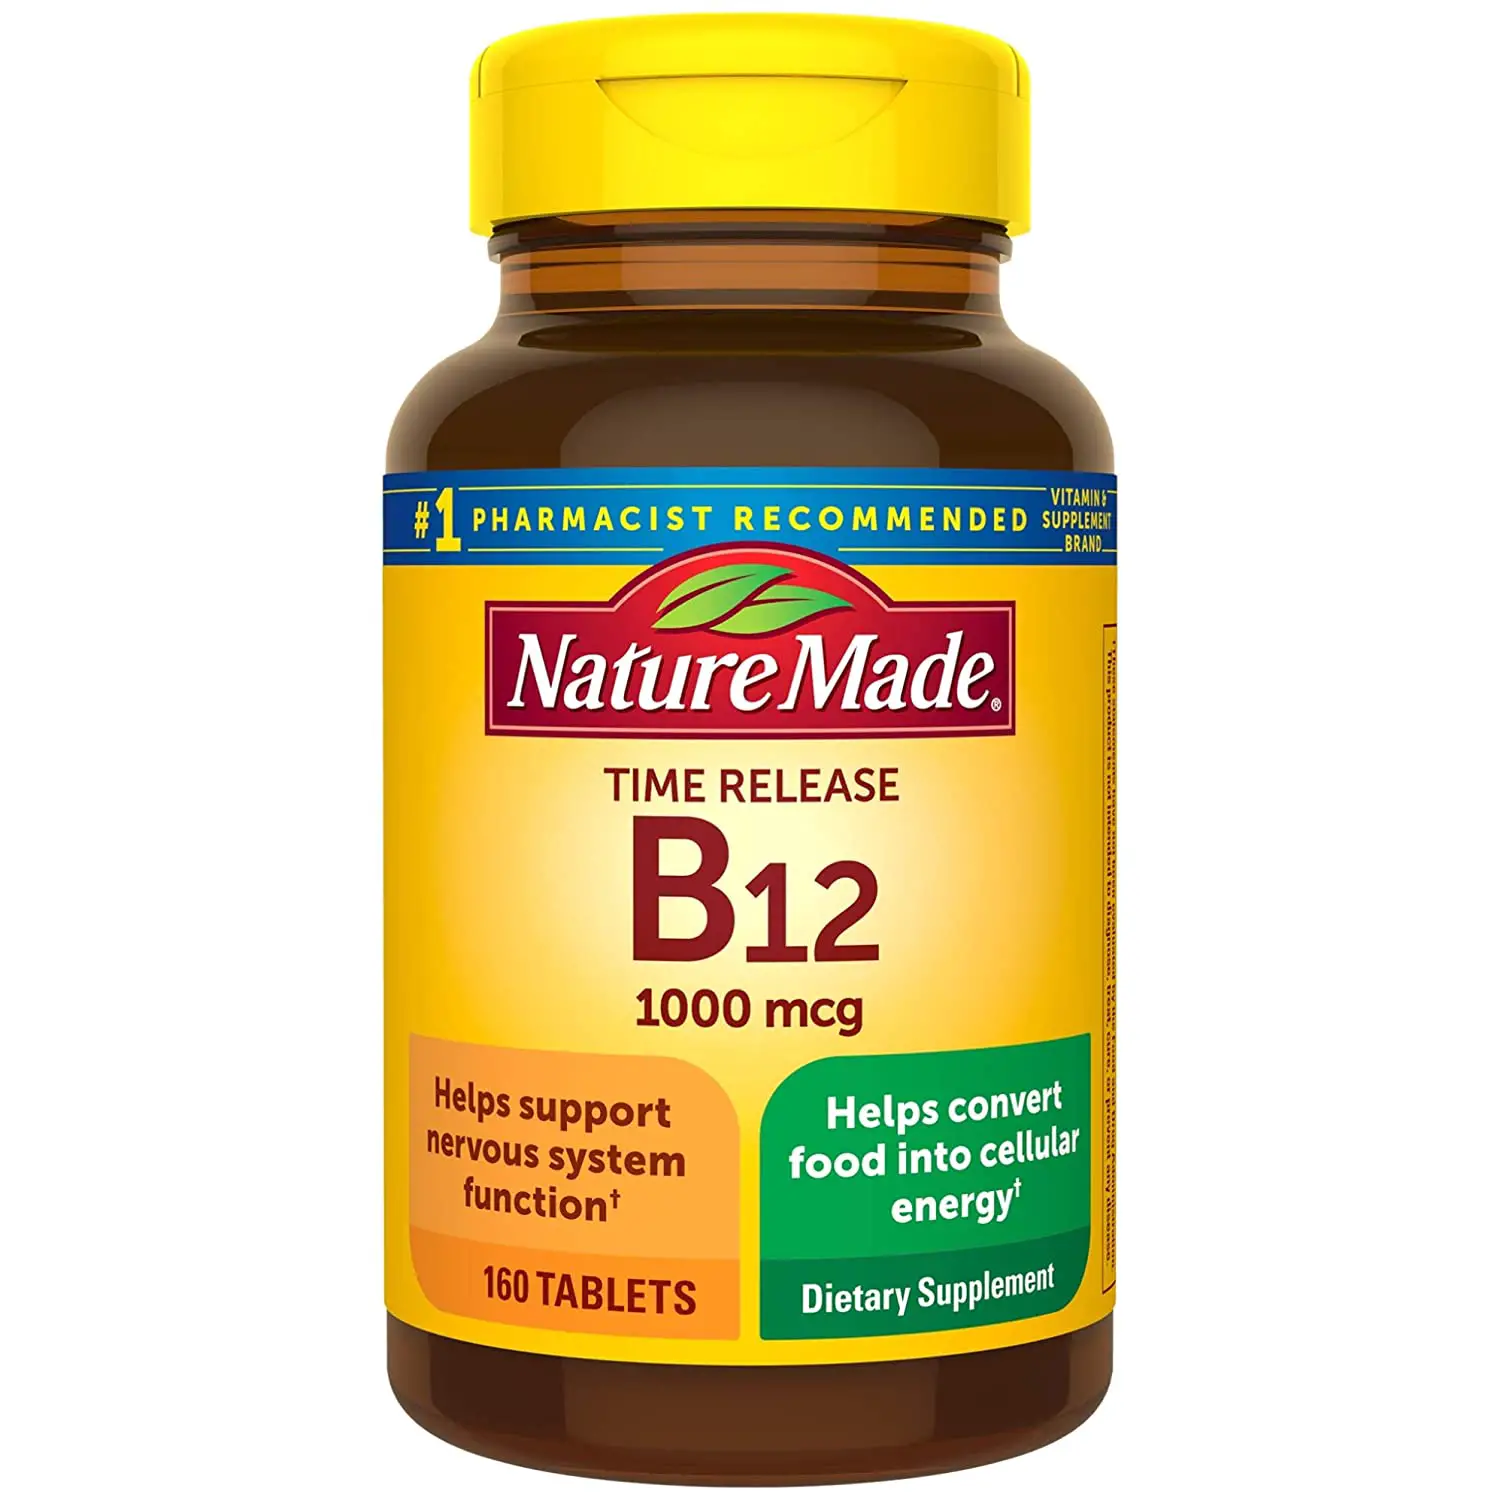 Ranking the best vitamin B12 supplements of 2021